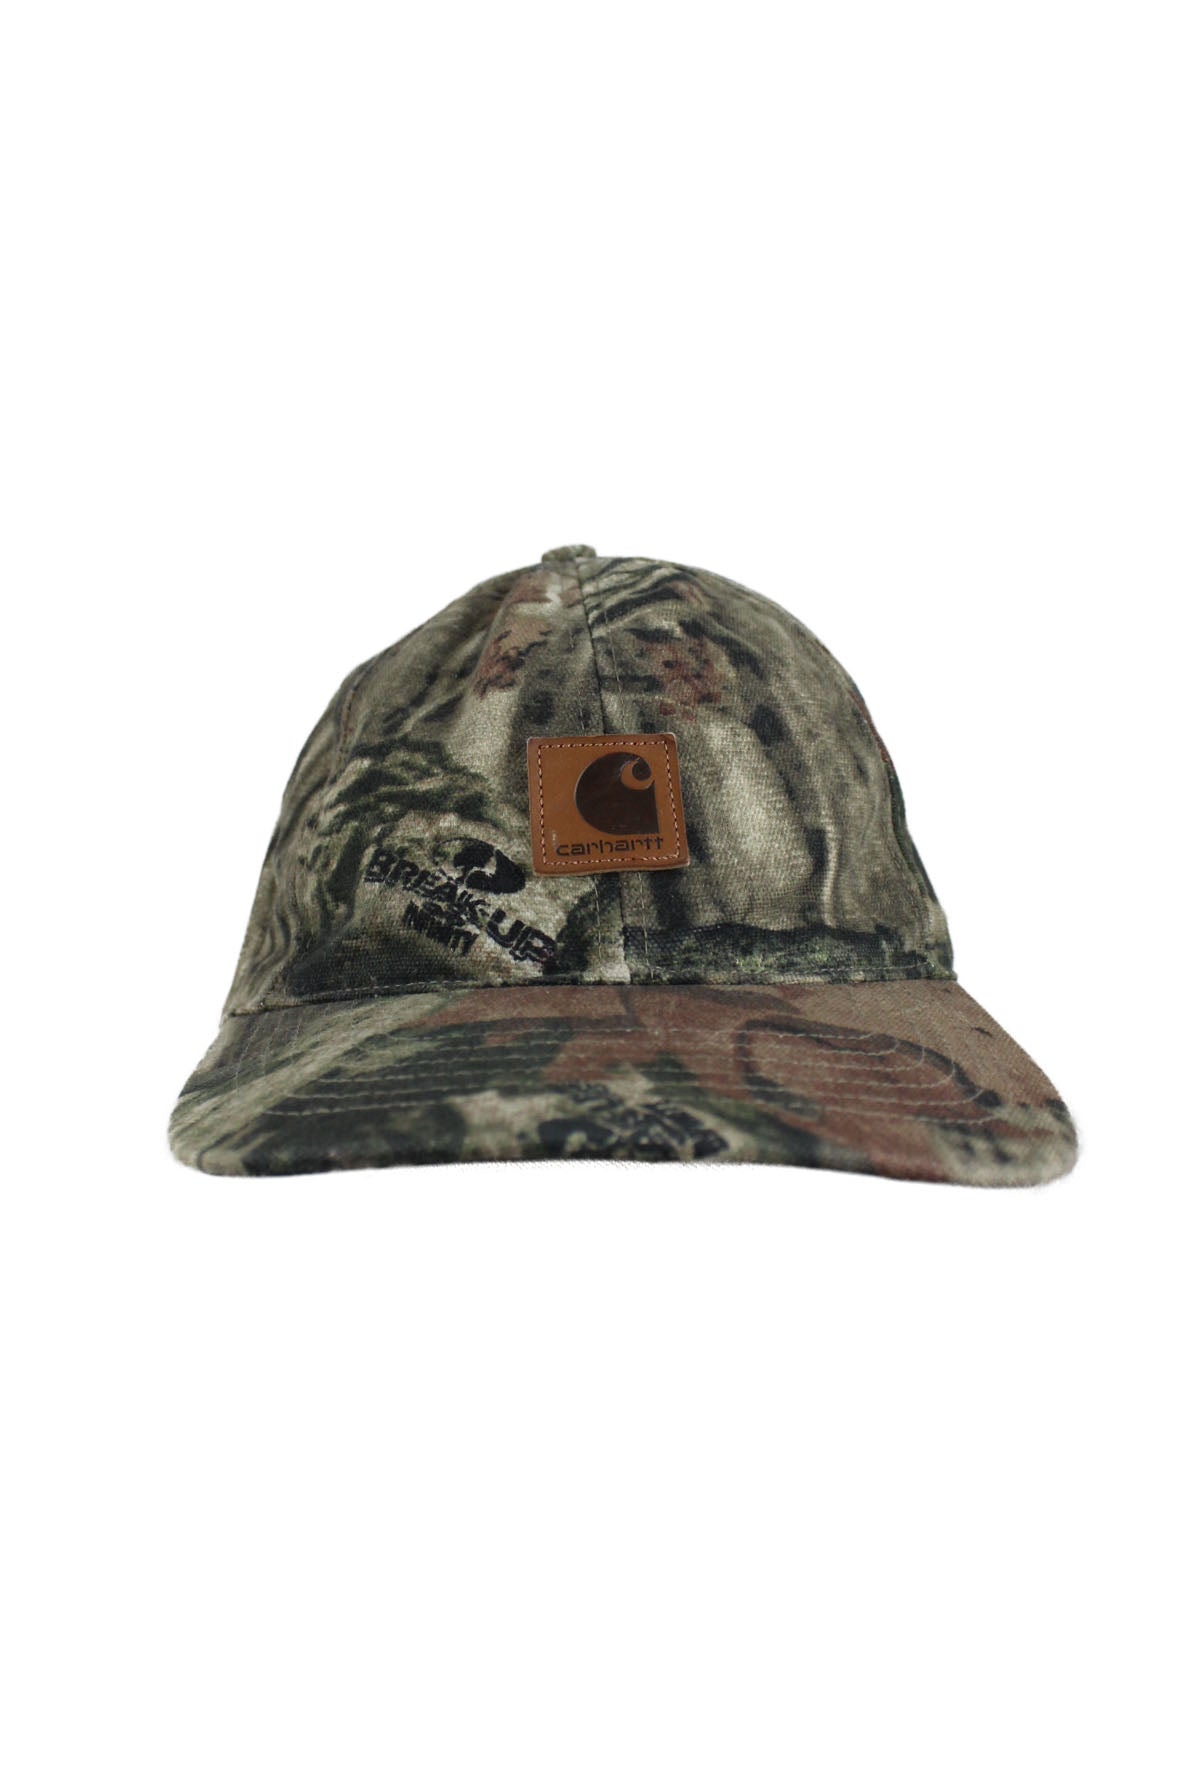 front view of carhartt ‘mossy oak break-up infinity’ camo unstructured six panel canvas hat. features leather ‘carhartt logo tag at front and adjustable velcro strap closure at back.